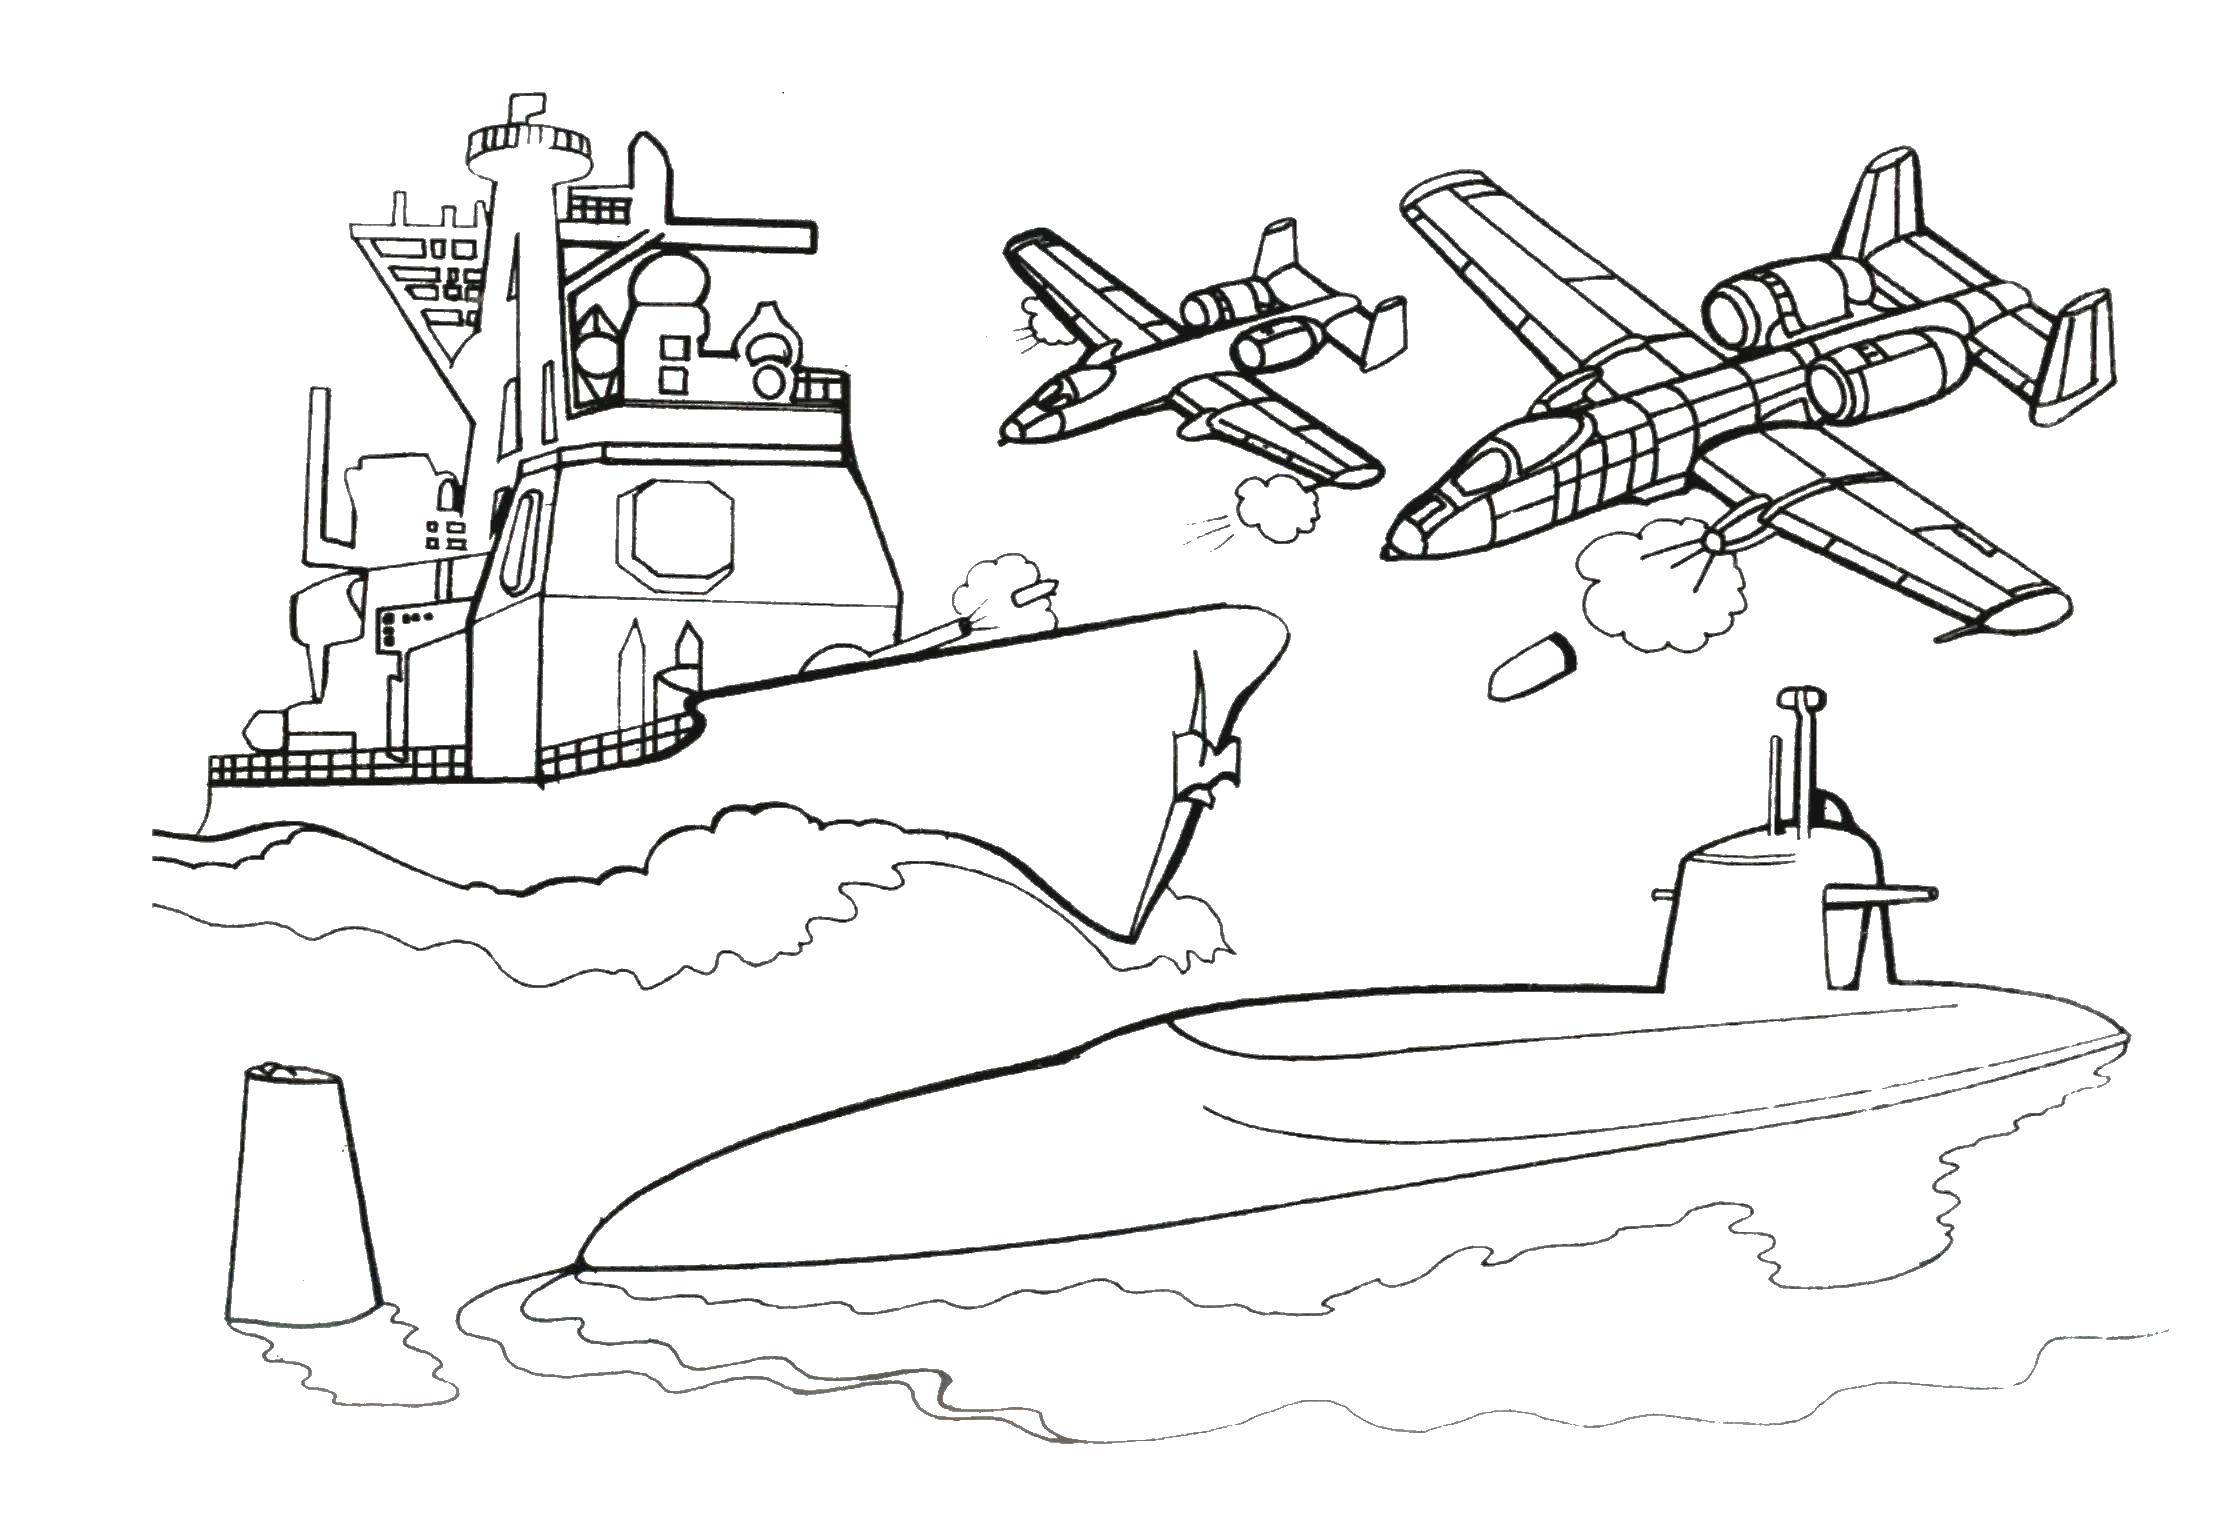 Coloring Ships, planes, boat. Category Equipment. Tags:  military equipment, war, ships, planes, boat.